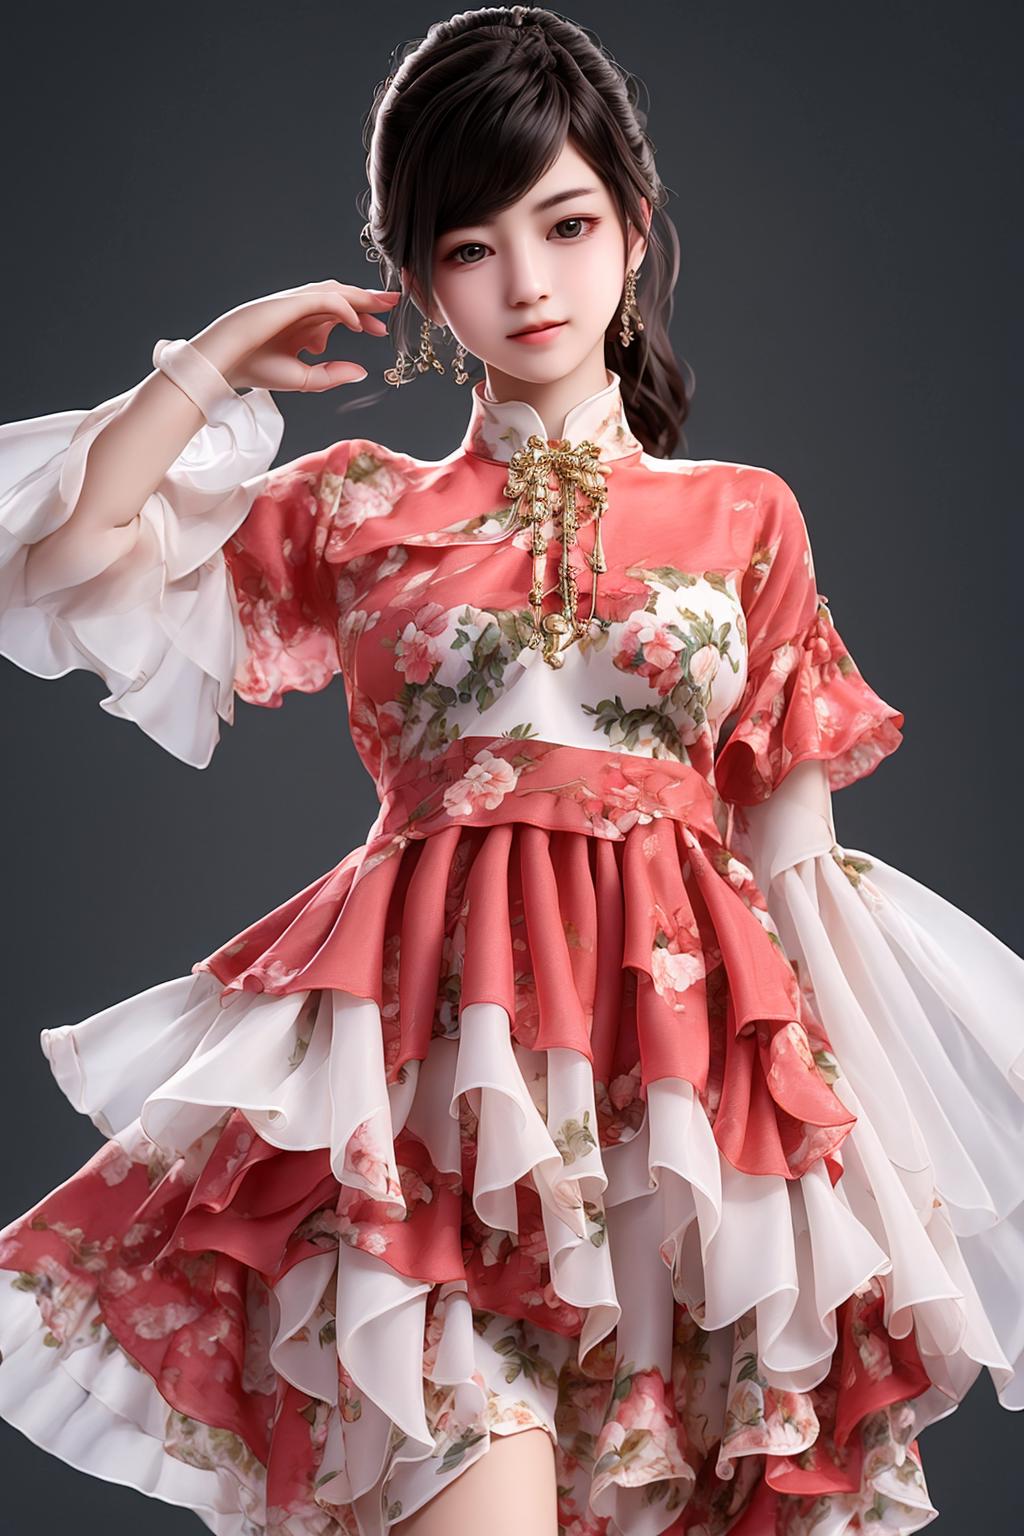 New Chinese Style Suit（新中式服饰）LoRa image by axebro